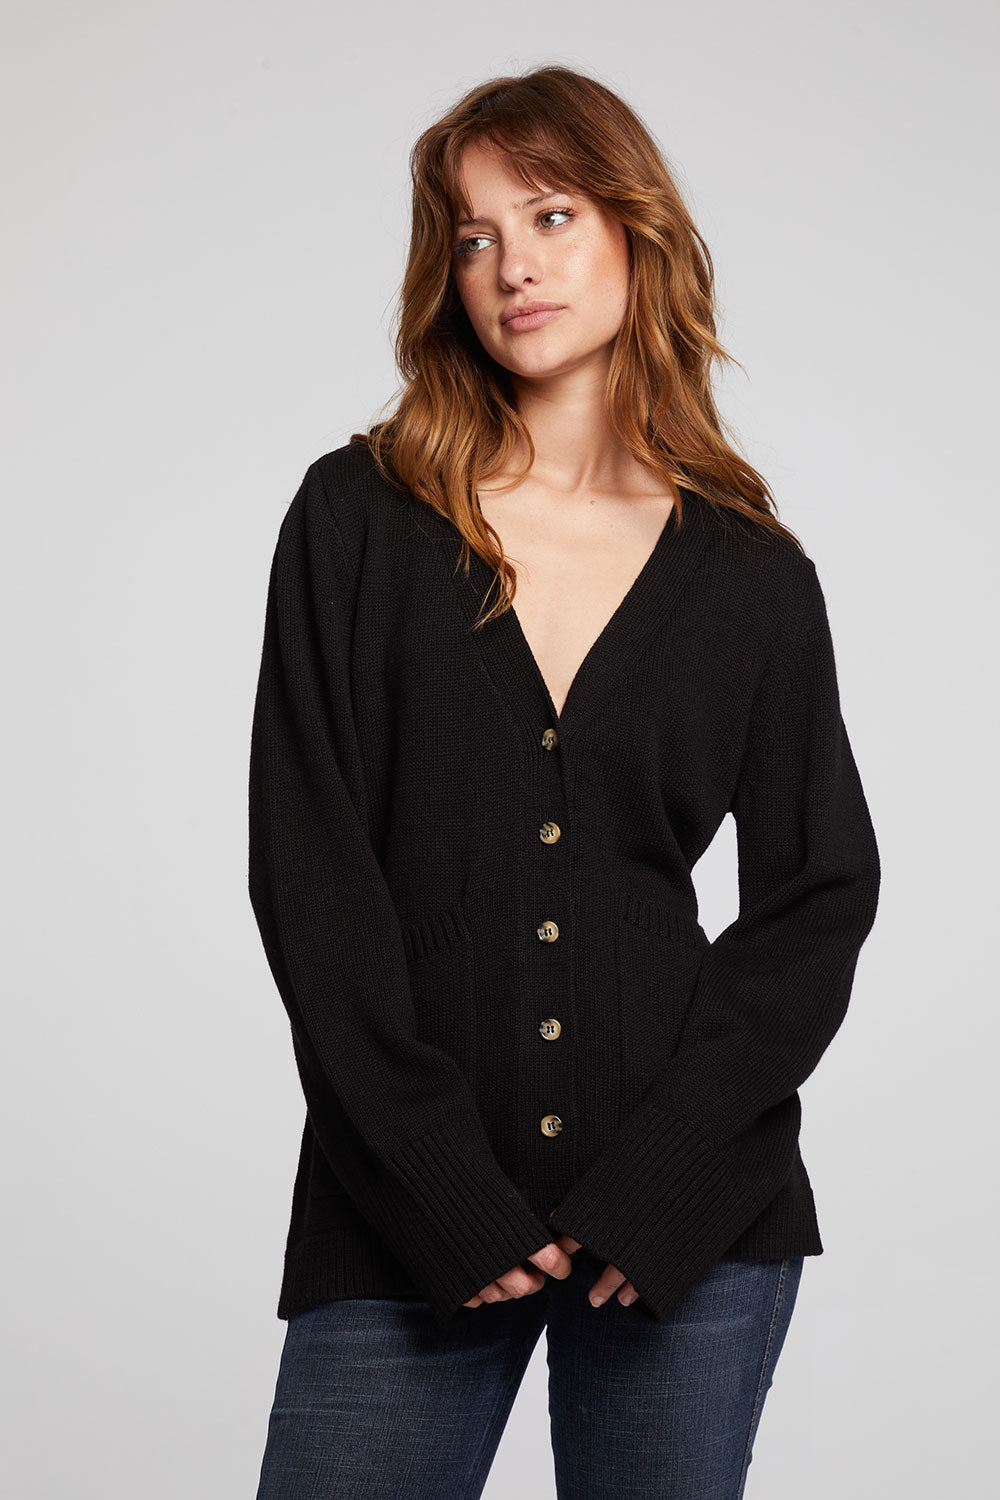 Presley Licorice Cardigan WOMENS chaserbrand